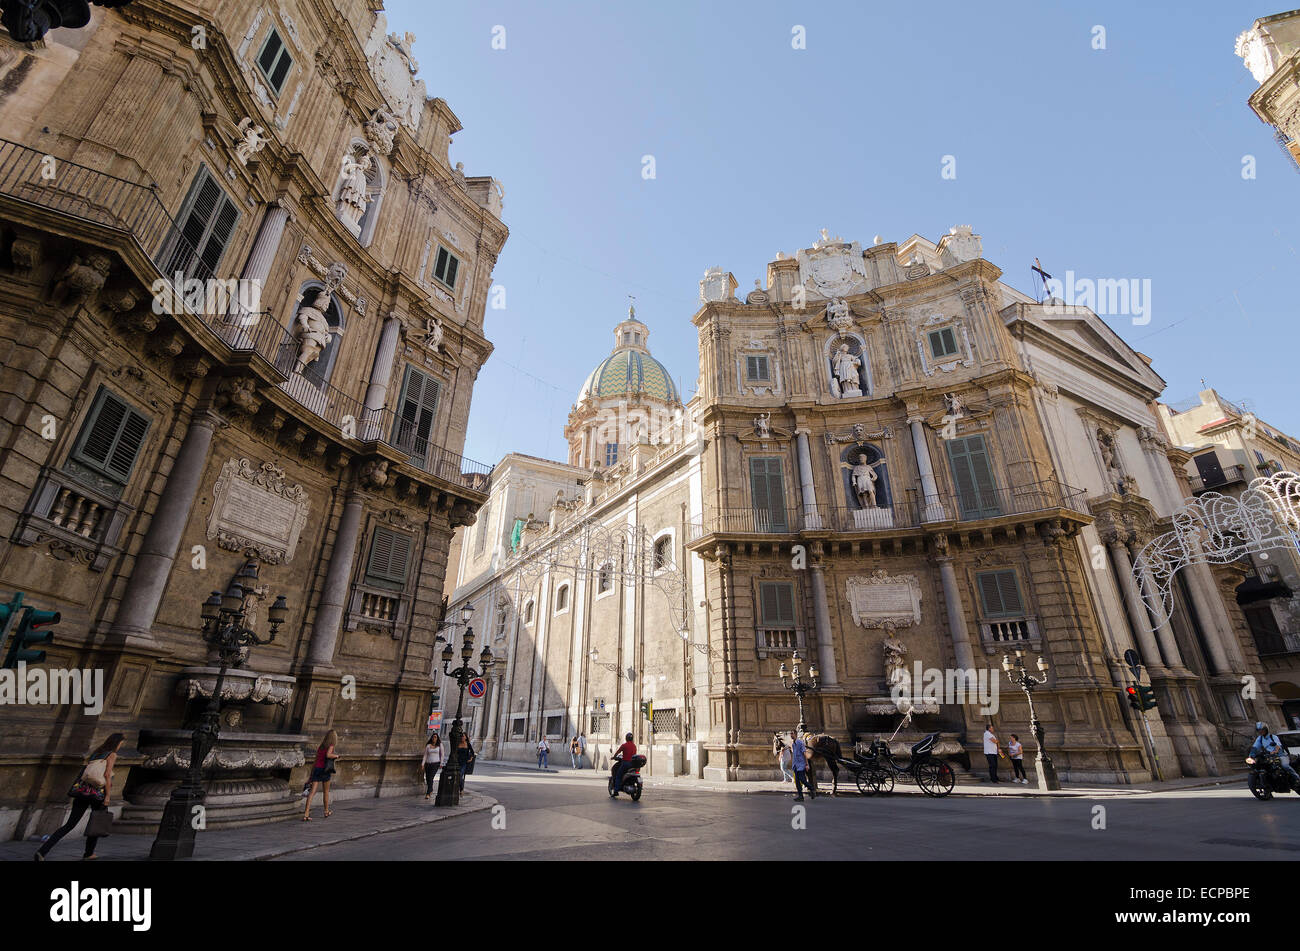 PALERMO, SICILY, ITALY - OCTOBER 3, 2012:  a view of the baroque square of Quattre Canti on October 3, 2012 in Palermo, Italy Stock Photo